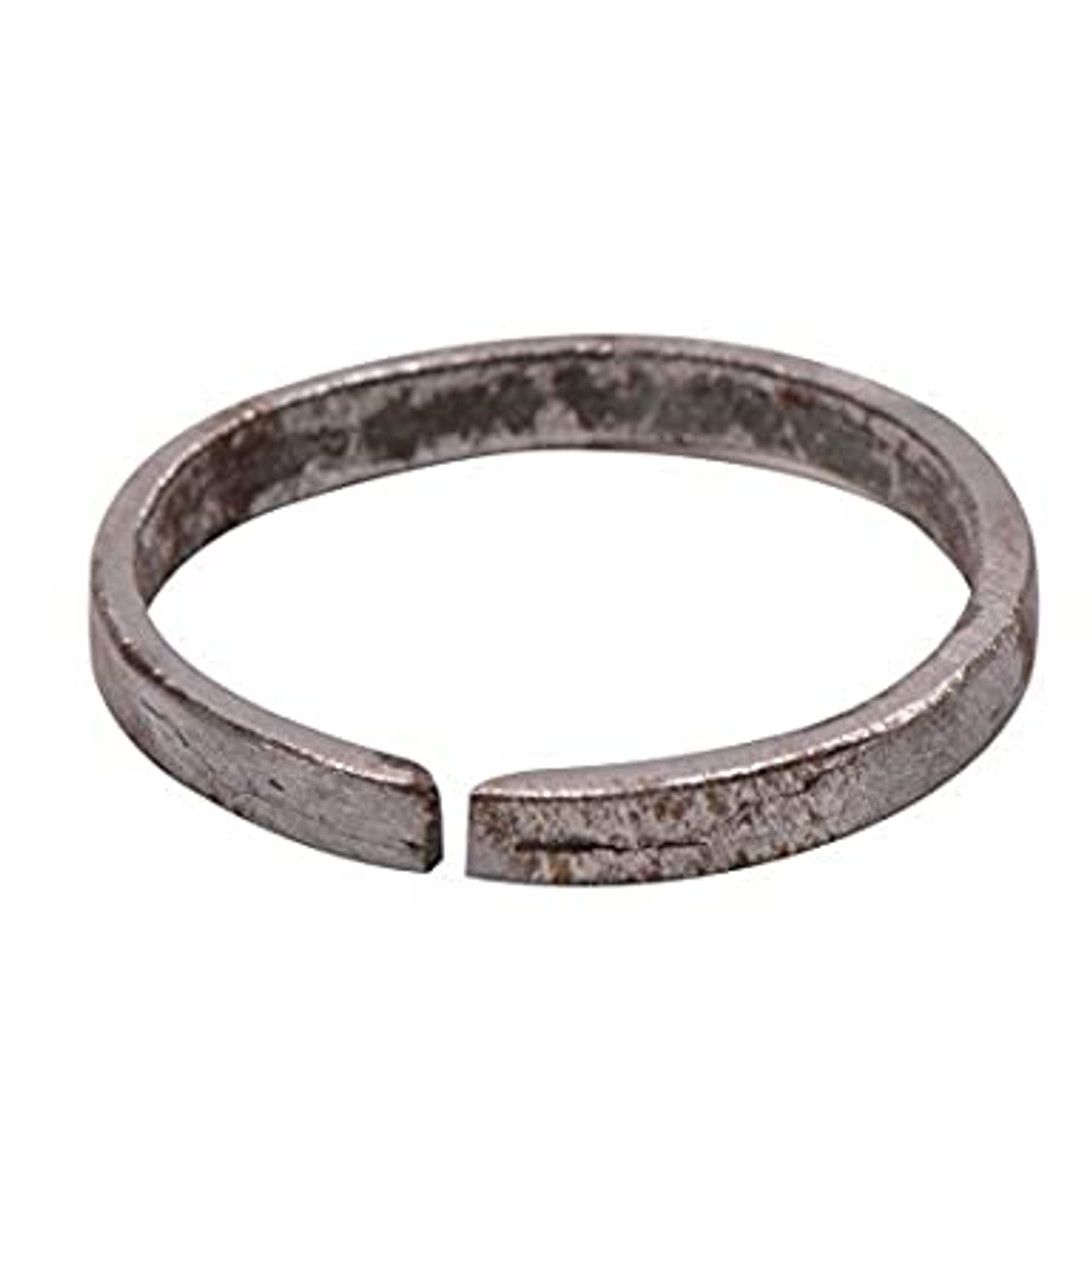 IS4A Pure Saturn Handcrafted Iron Ring Shani Real Black Horse Shoe Ring Set  of 2 (6)|Amazon.com